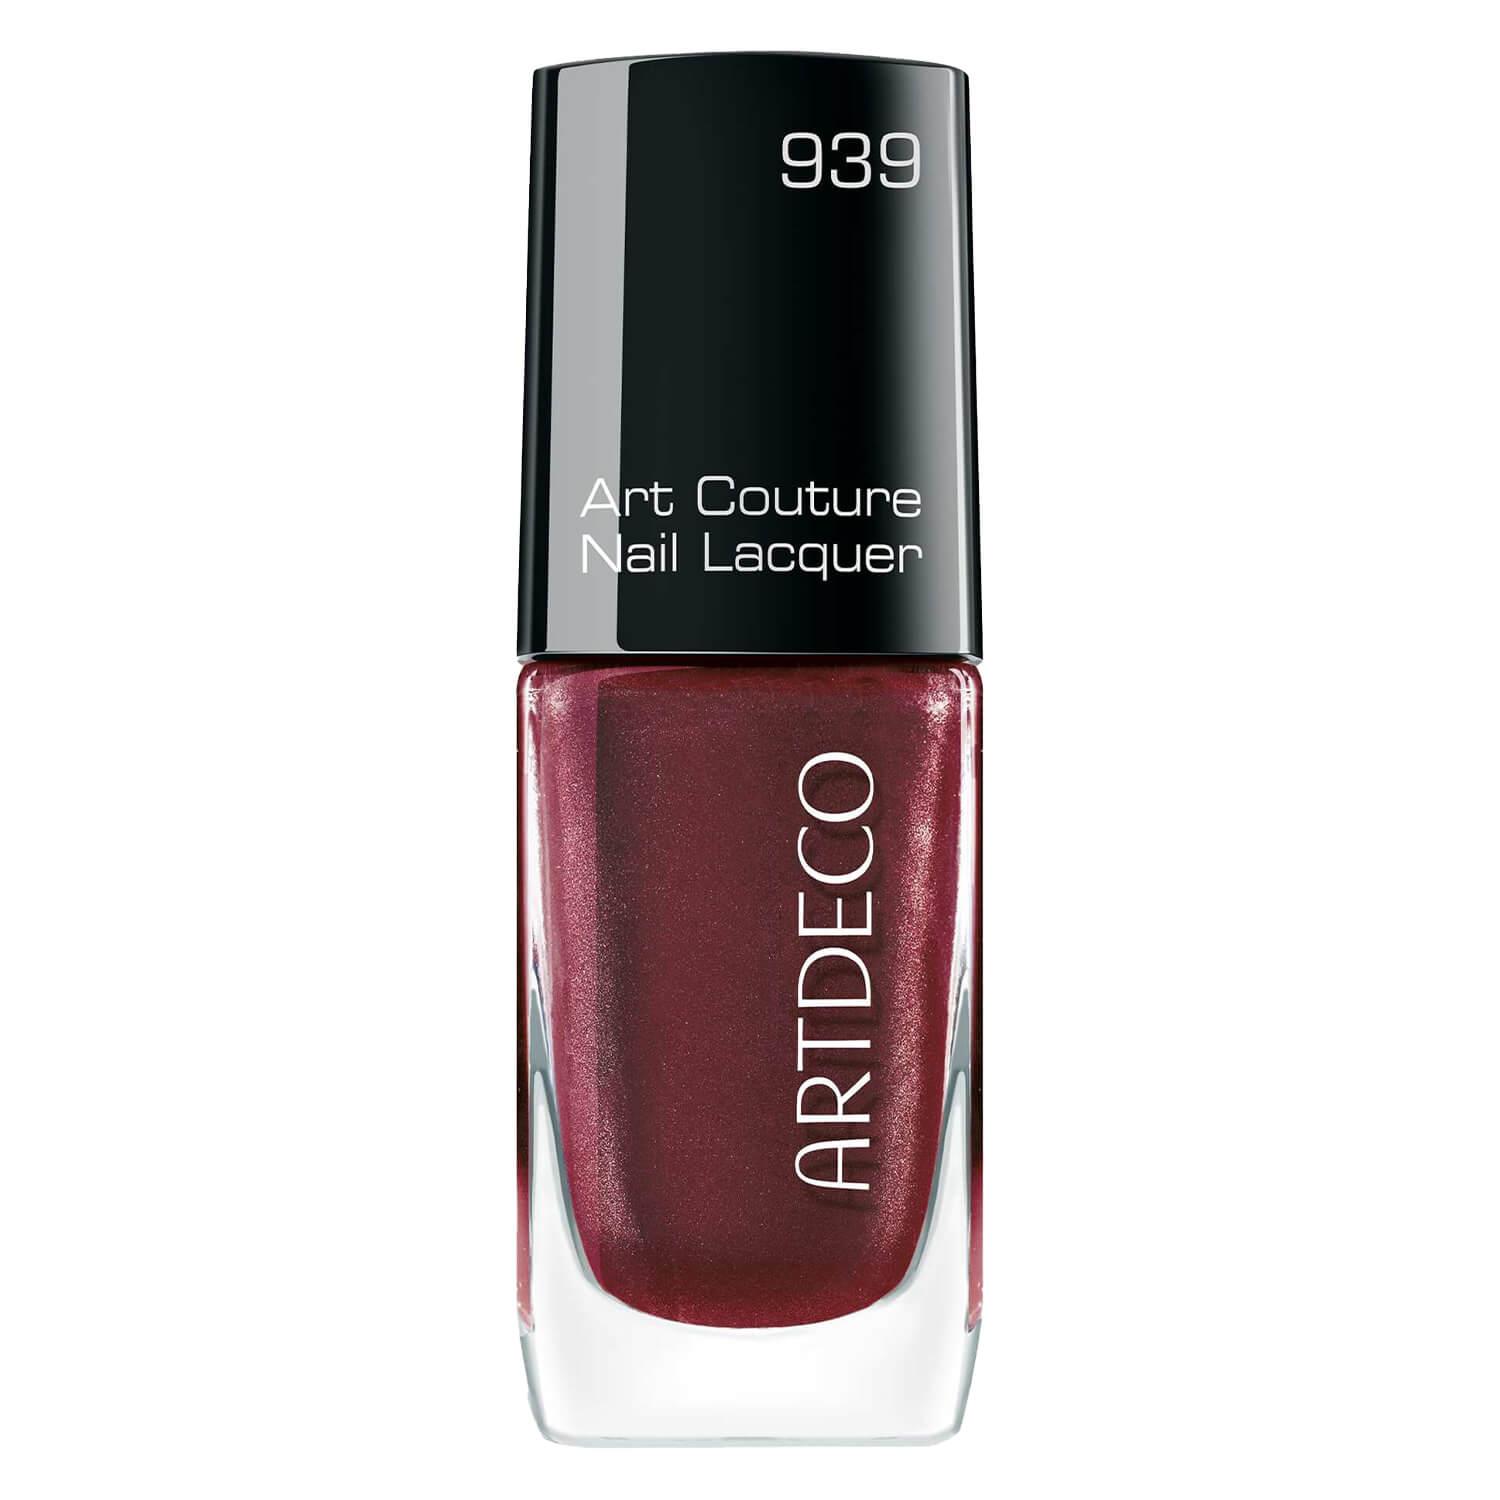 Art Couture - Nail Lacquer Burgundy Glamour 939